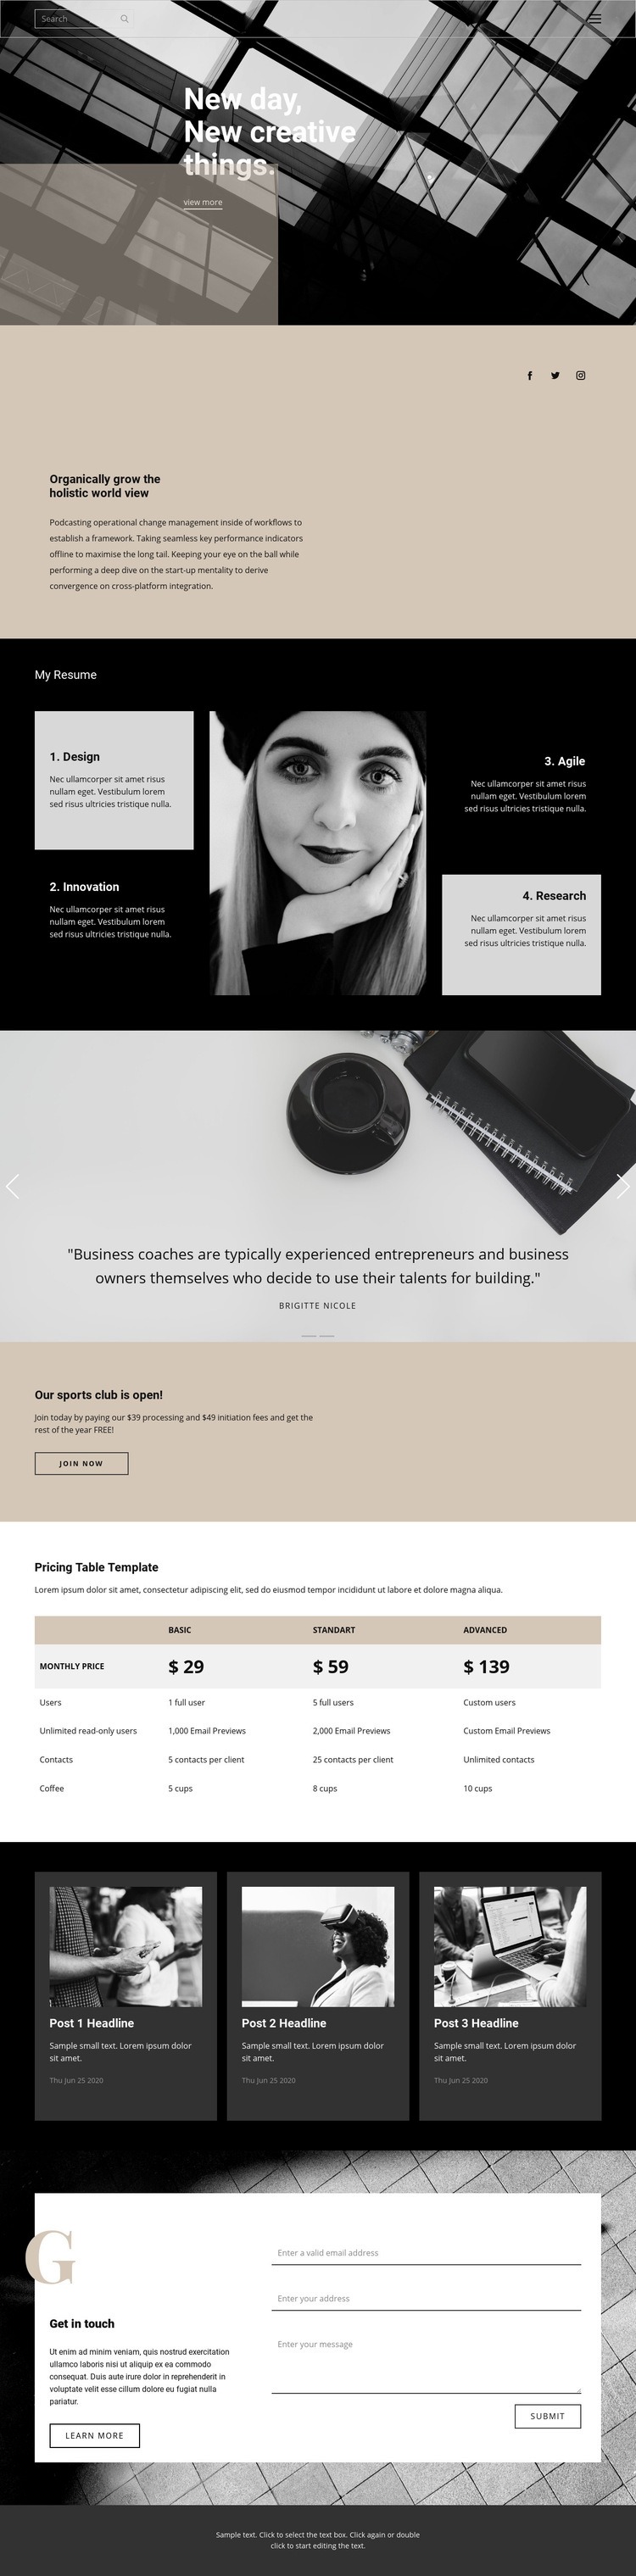 Where to start a business Wix Template Alternative